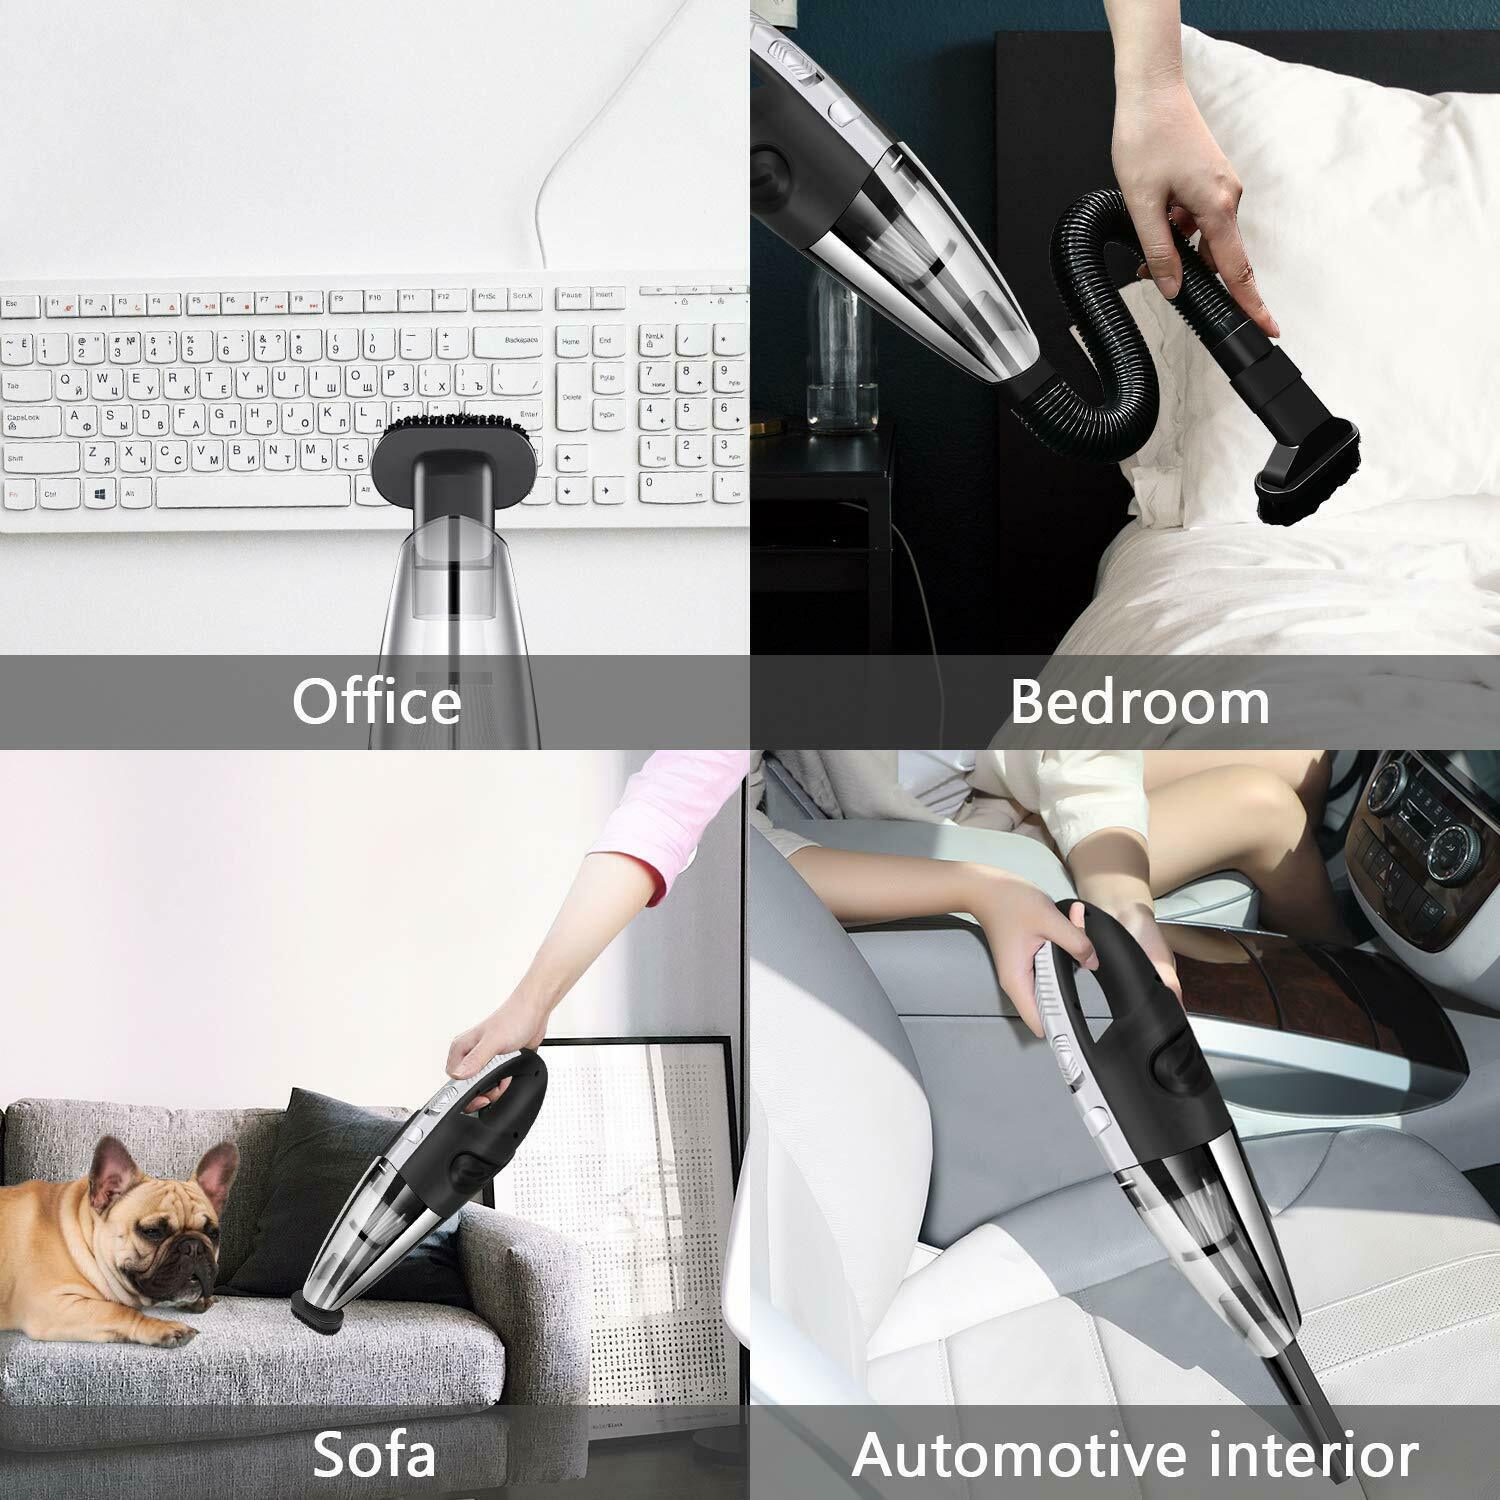 6000PA Car Vacuum Cleaner Handled Vacuum Powerful Cyclonic Suction Cleaner Portable Wet and Dry Use Vacuum Cleaners for Car Home